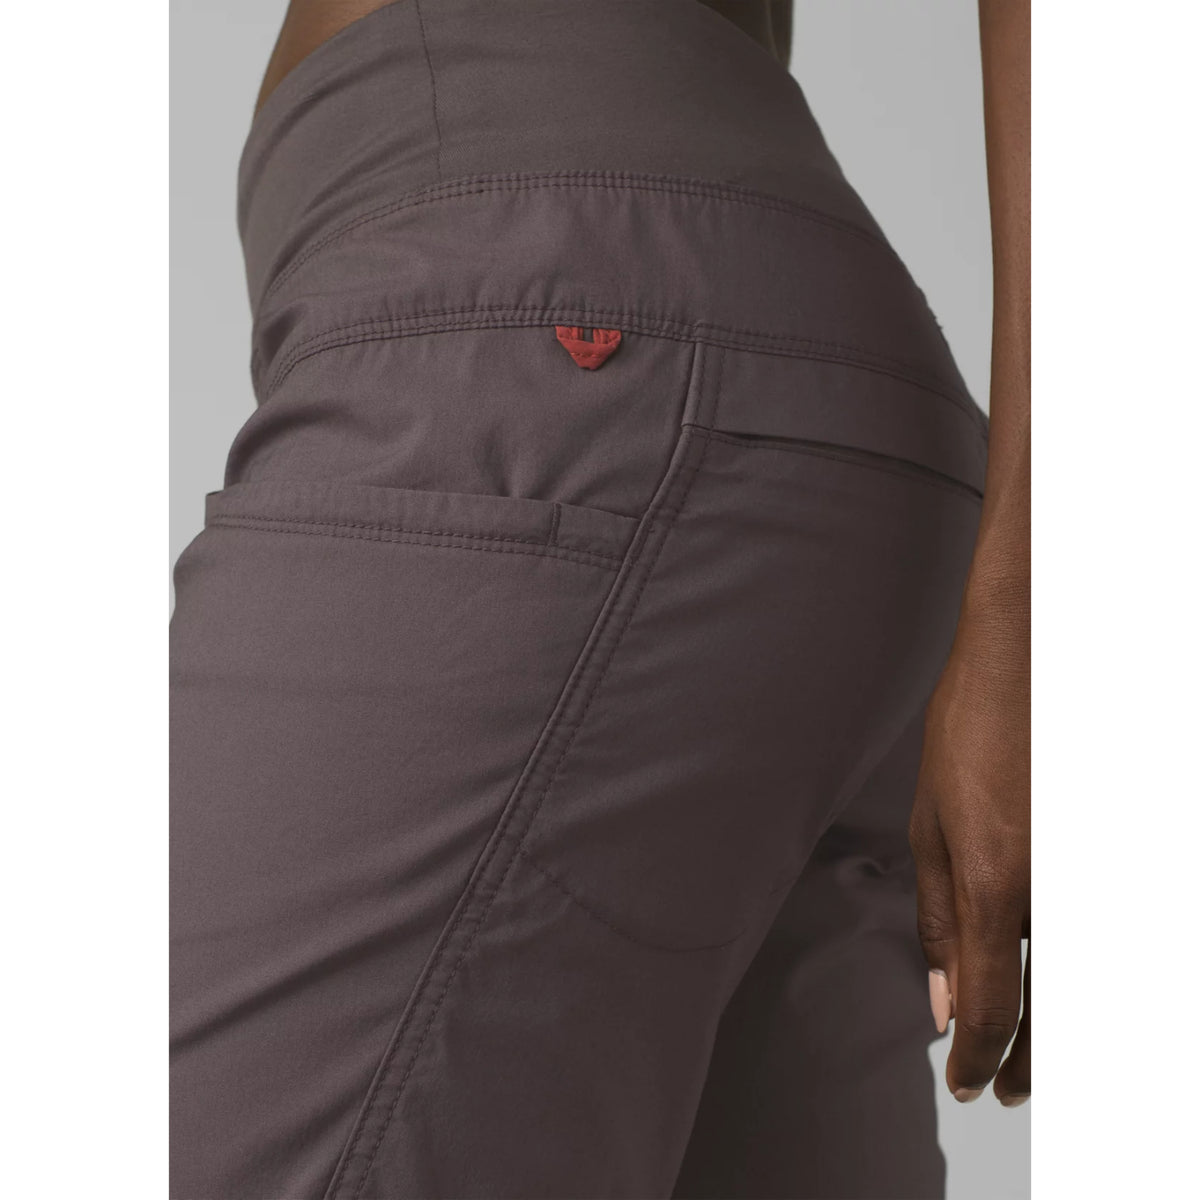 Prana Kanab Pant Womens in granite colour showing front